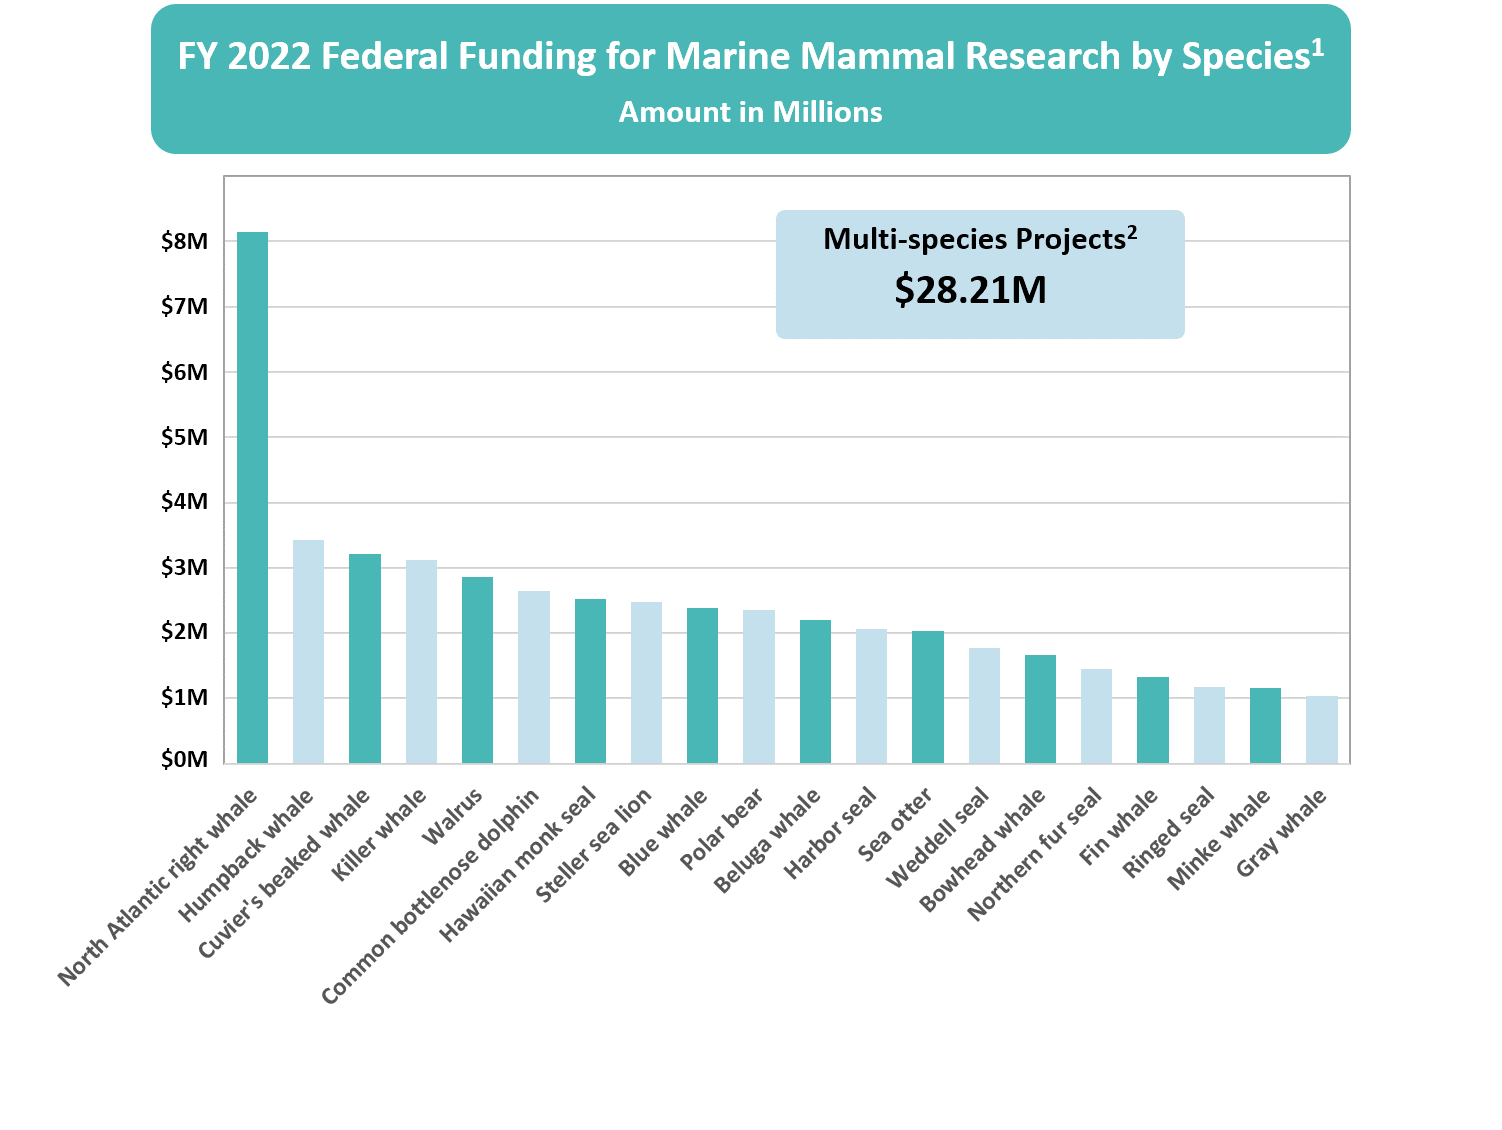 Bar char of species funding levels reported in the FY 2022 SFFR.